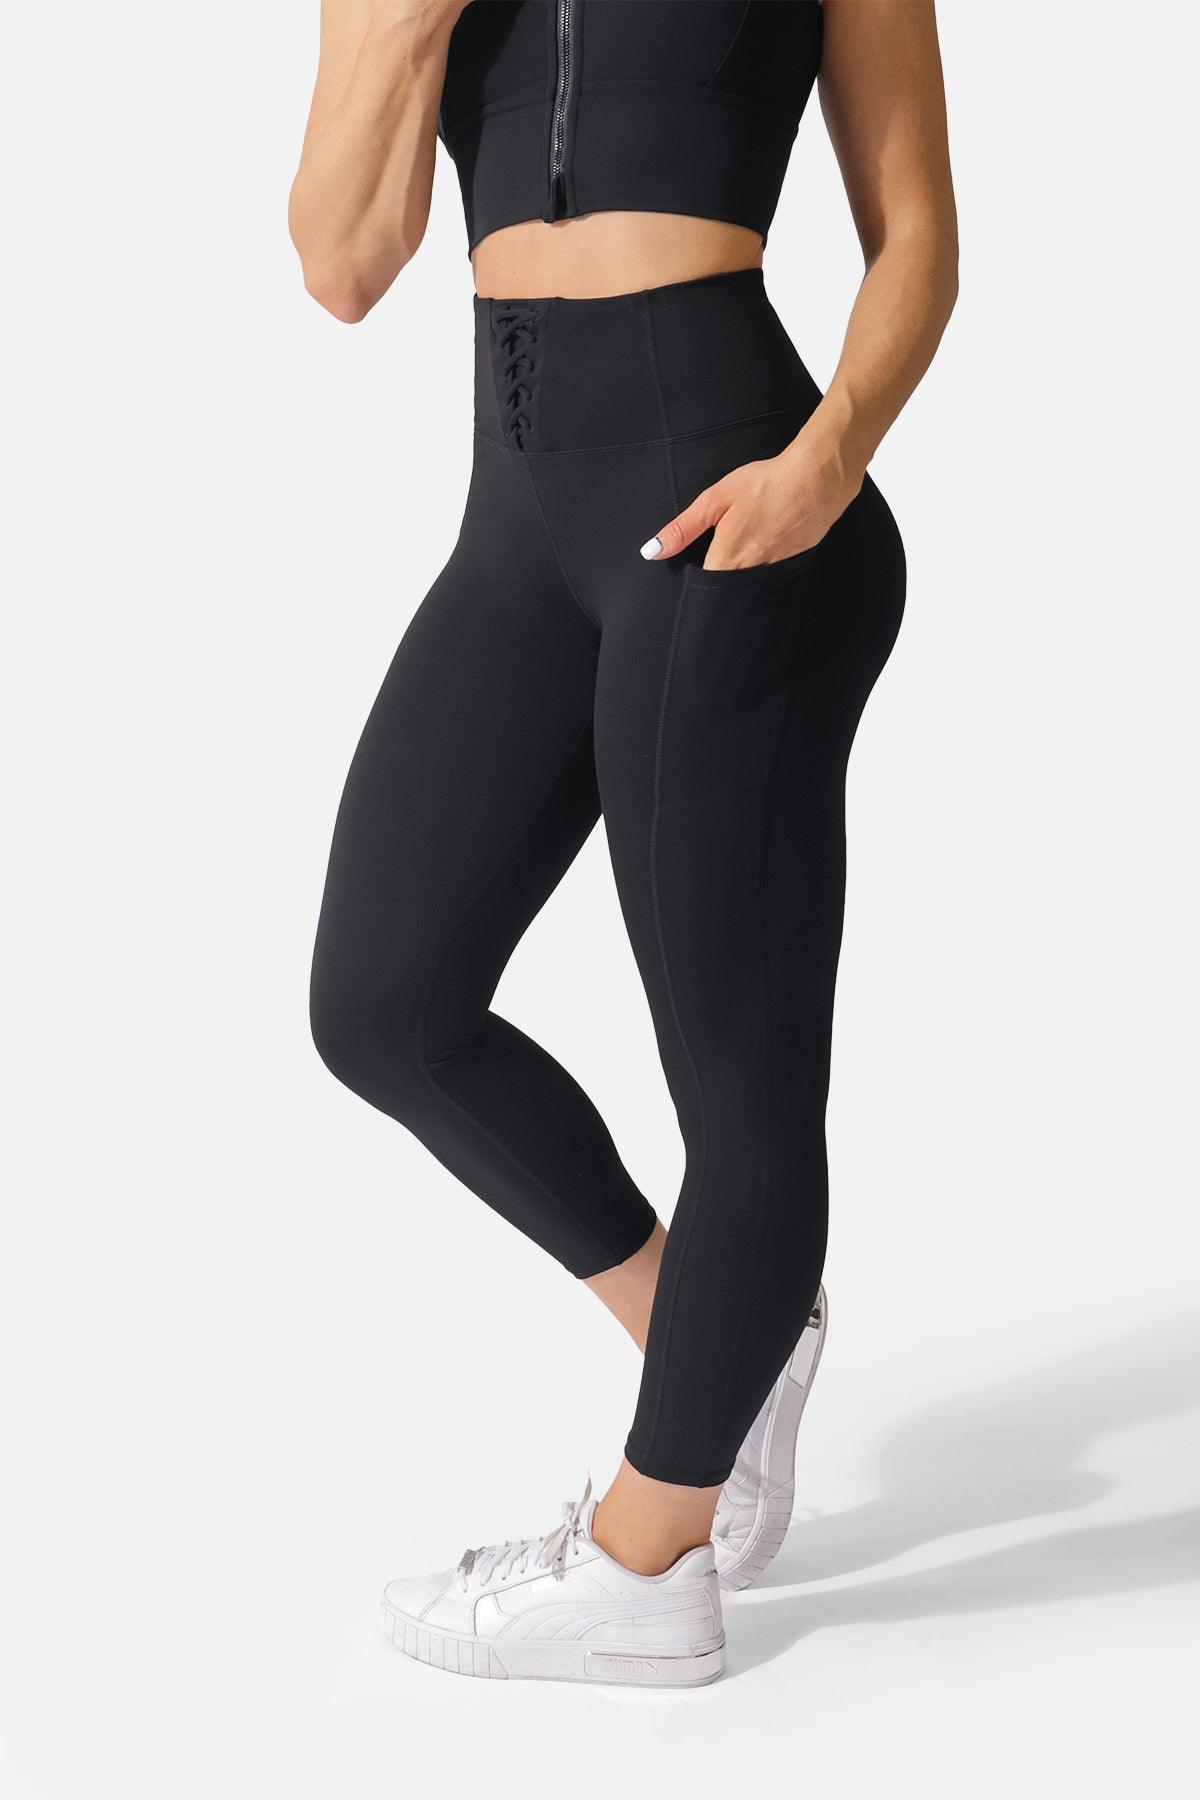 Fabletics Women's On-The-Go PowerHold High-Waisted Legging, Maximum  Compression, Flattering